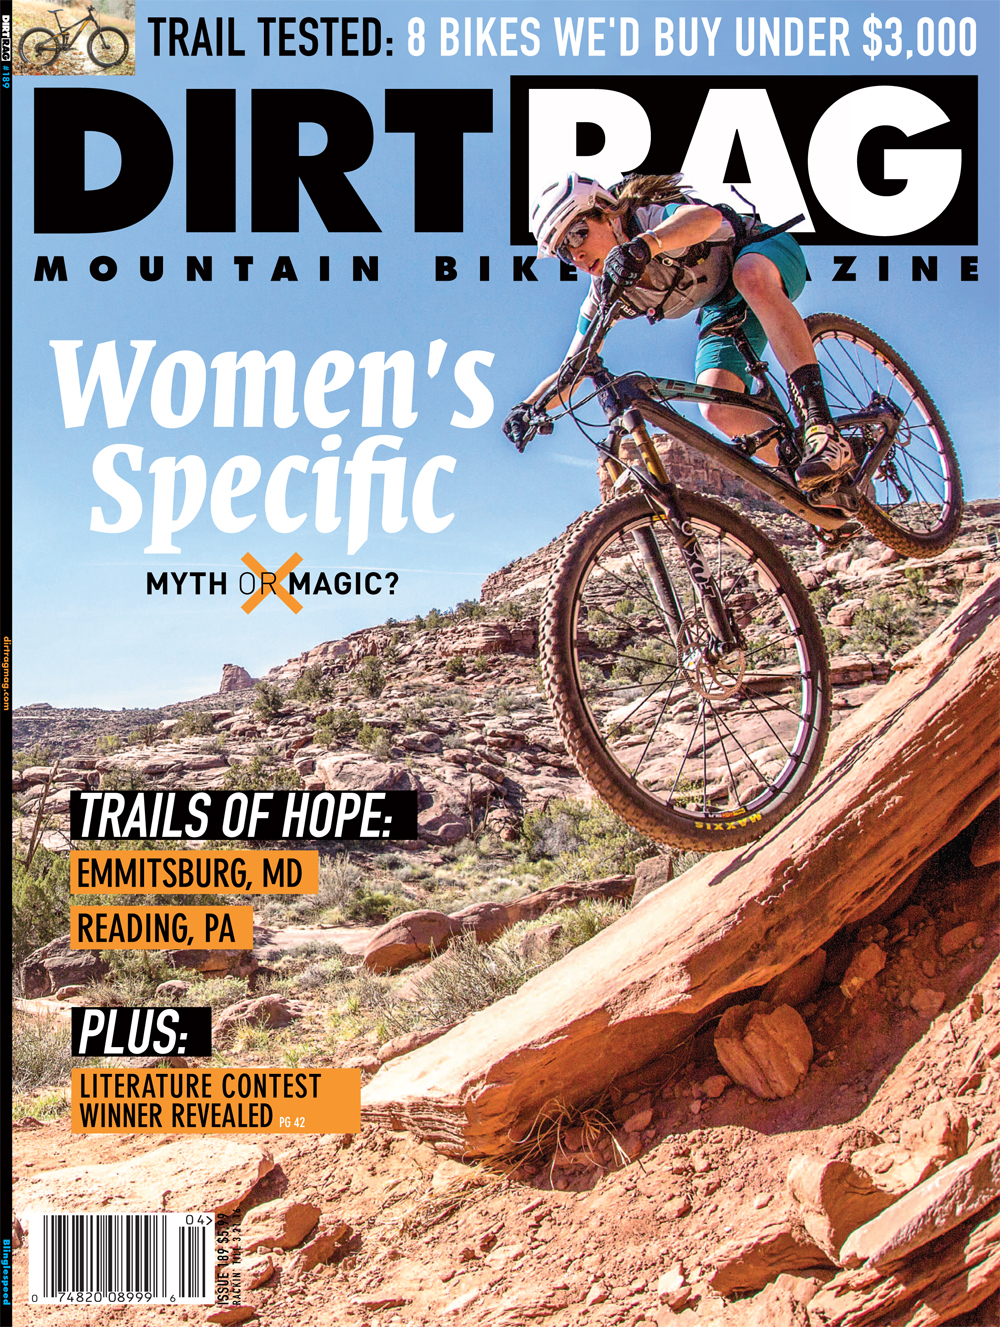 Dirt Rag Issue #189 is out!